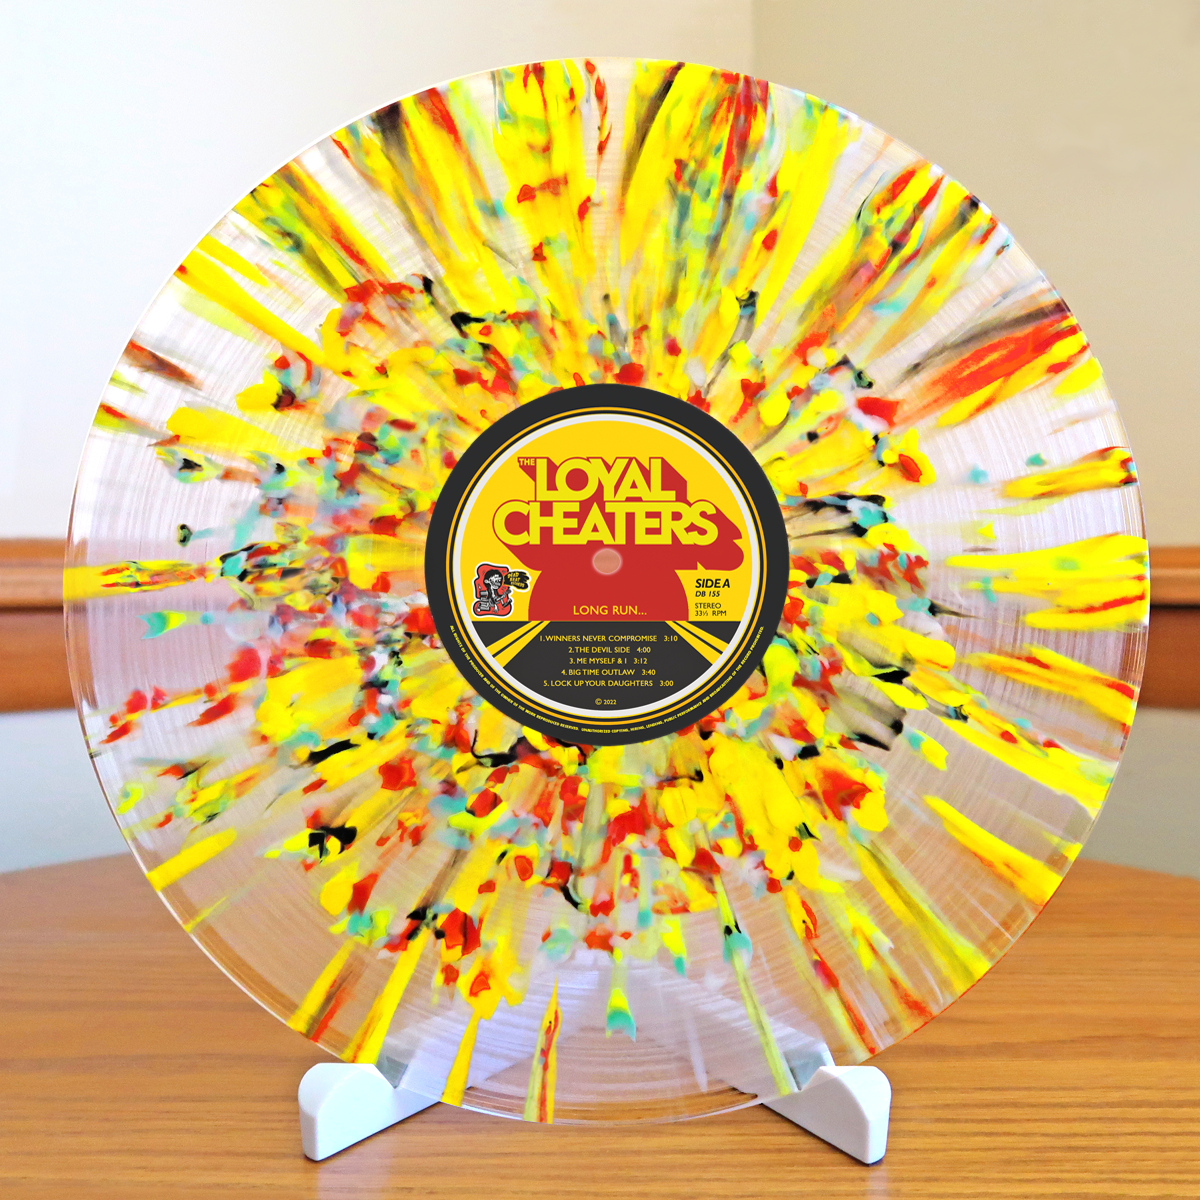 The Loyal Cheaters- Long Run... All Dead LP ~PSYCHO SPLATTER SPECIAL EDITION W/ METAL DIE-CUT PIN LTD TO 100!